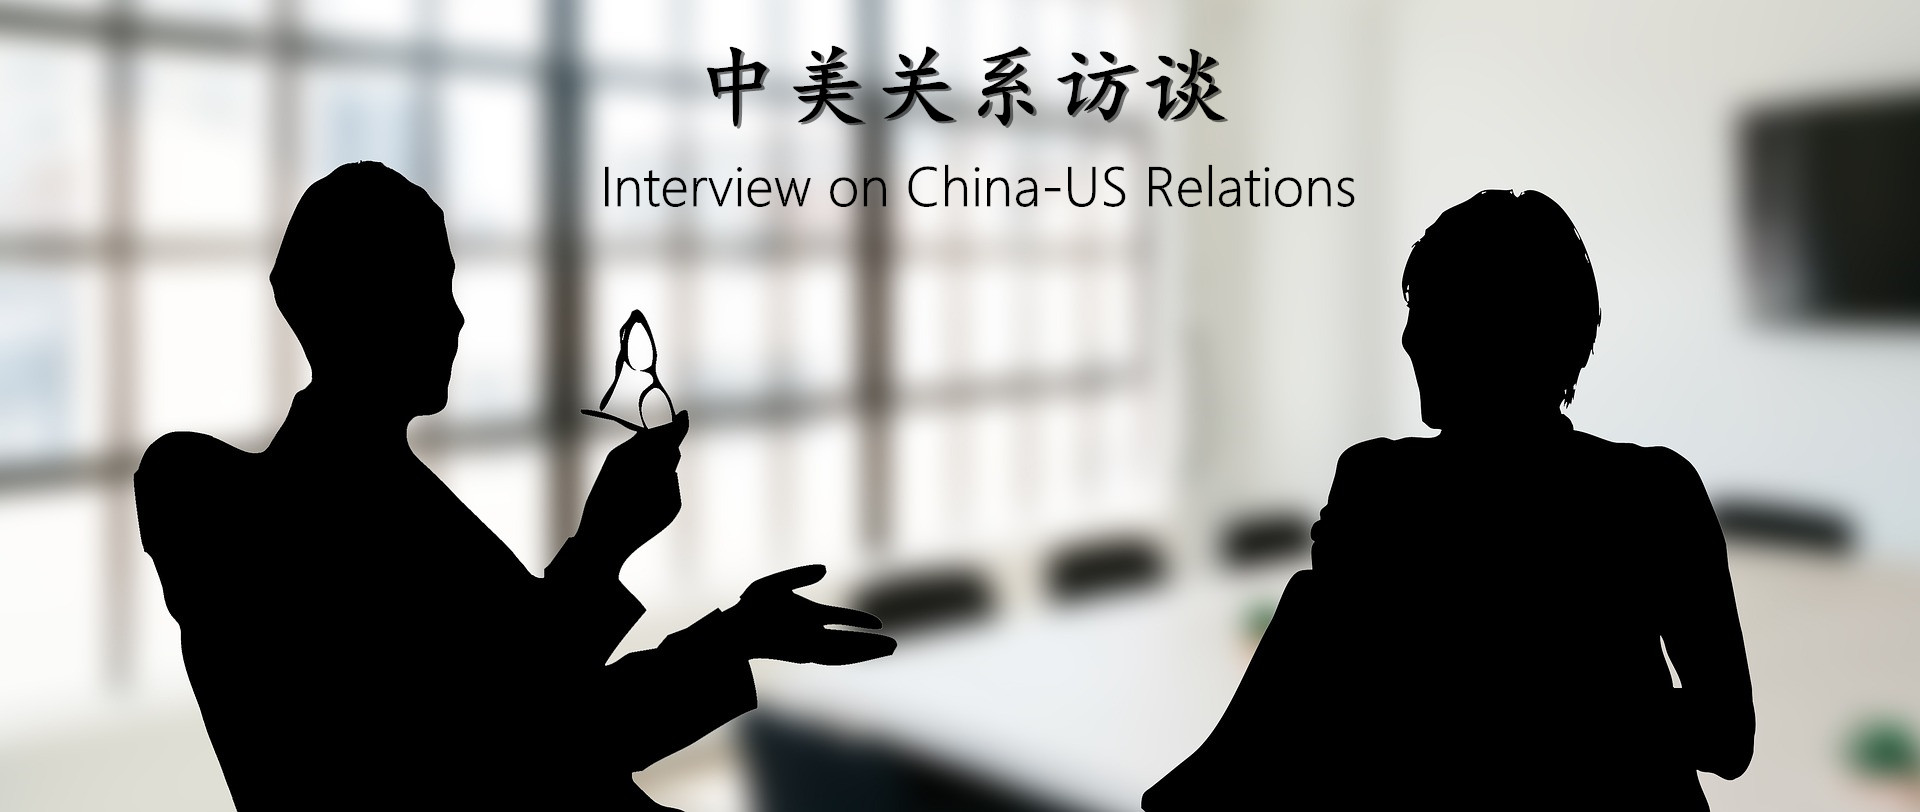 Interview on China-US Relations